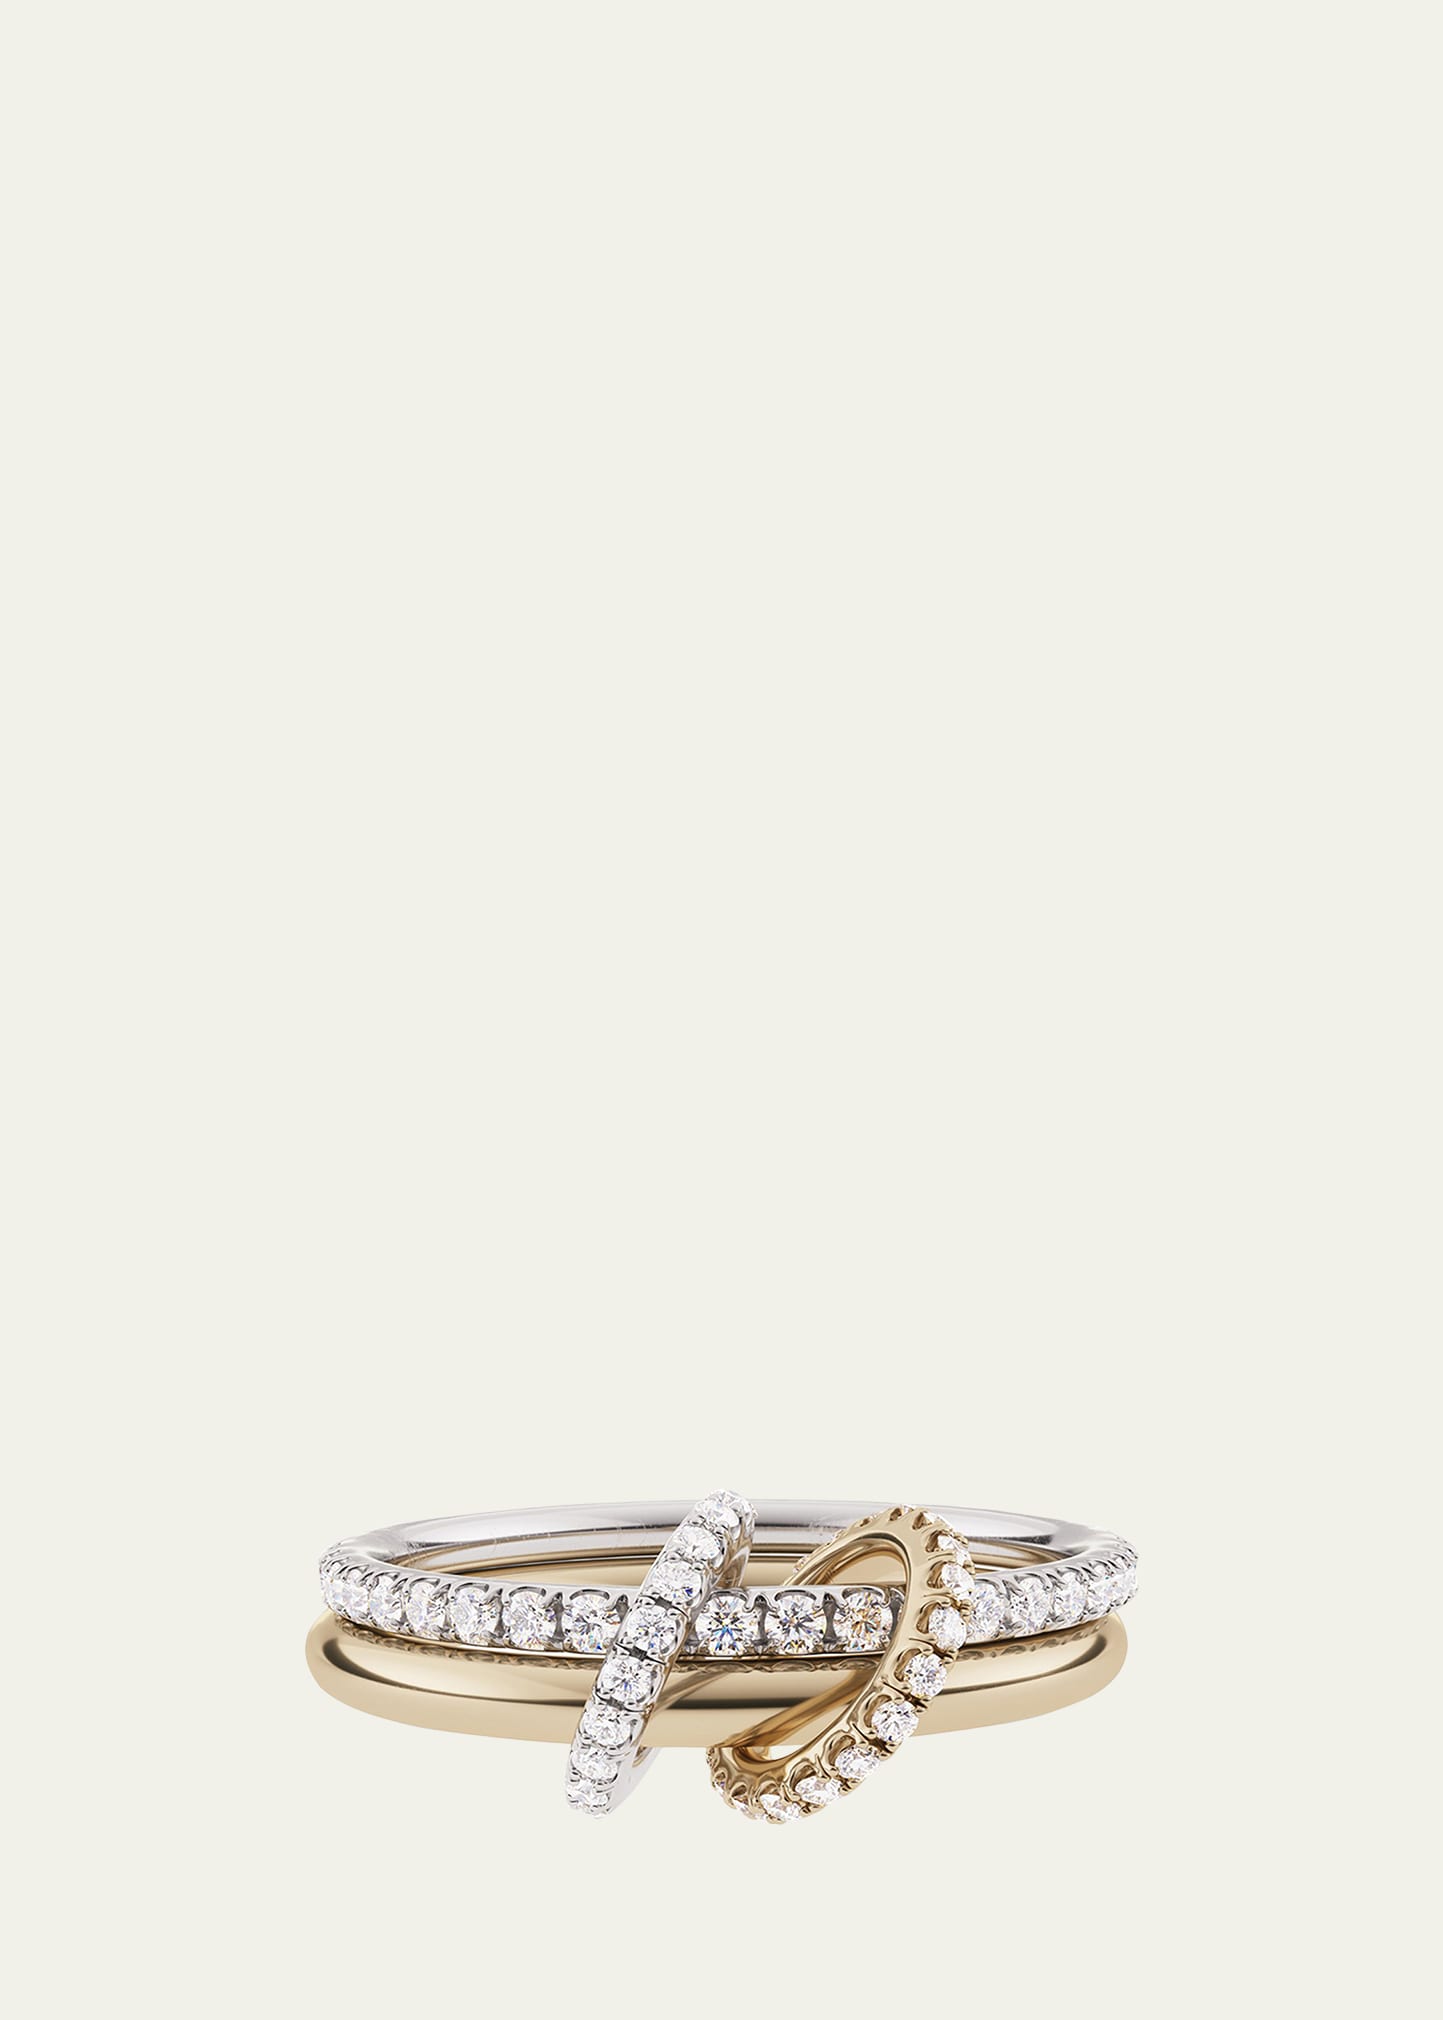 Ceres Gold Two-Linked Ring in 18K Yellow and White Gold with Pave-Set Diamonds